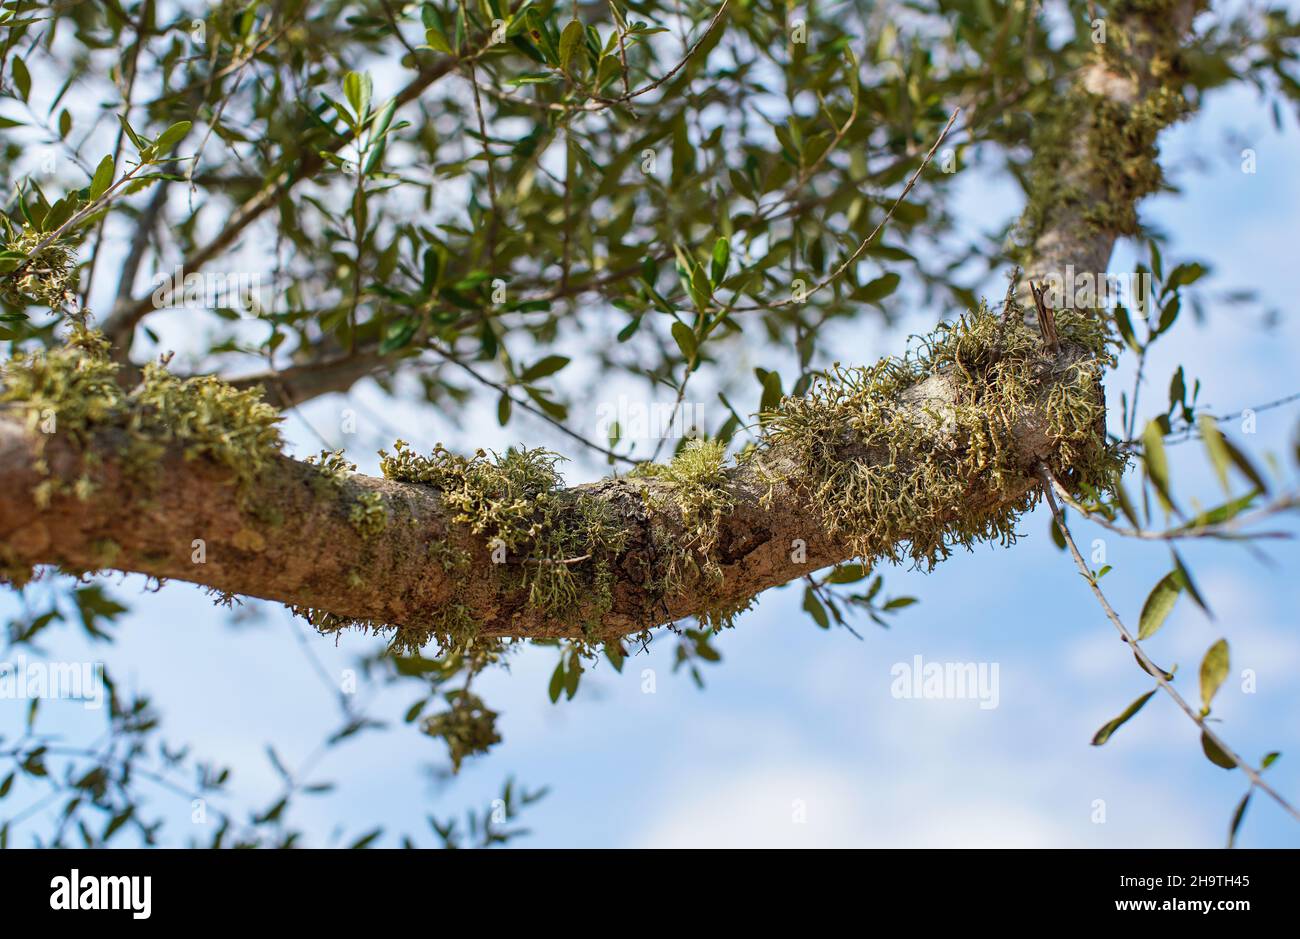 Green moss or lichen growing on tree branch, closeup detail, blurred leaves and sky background Stock Photo